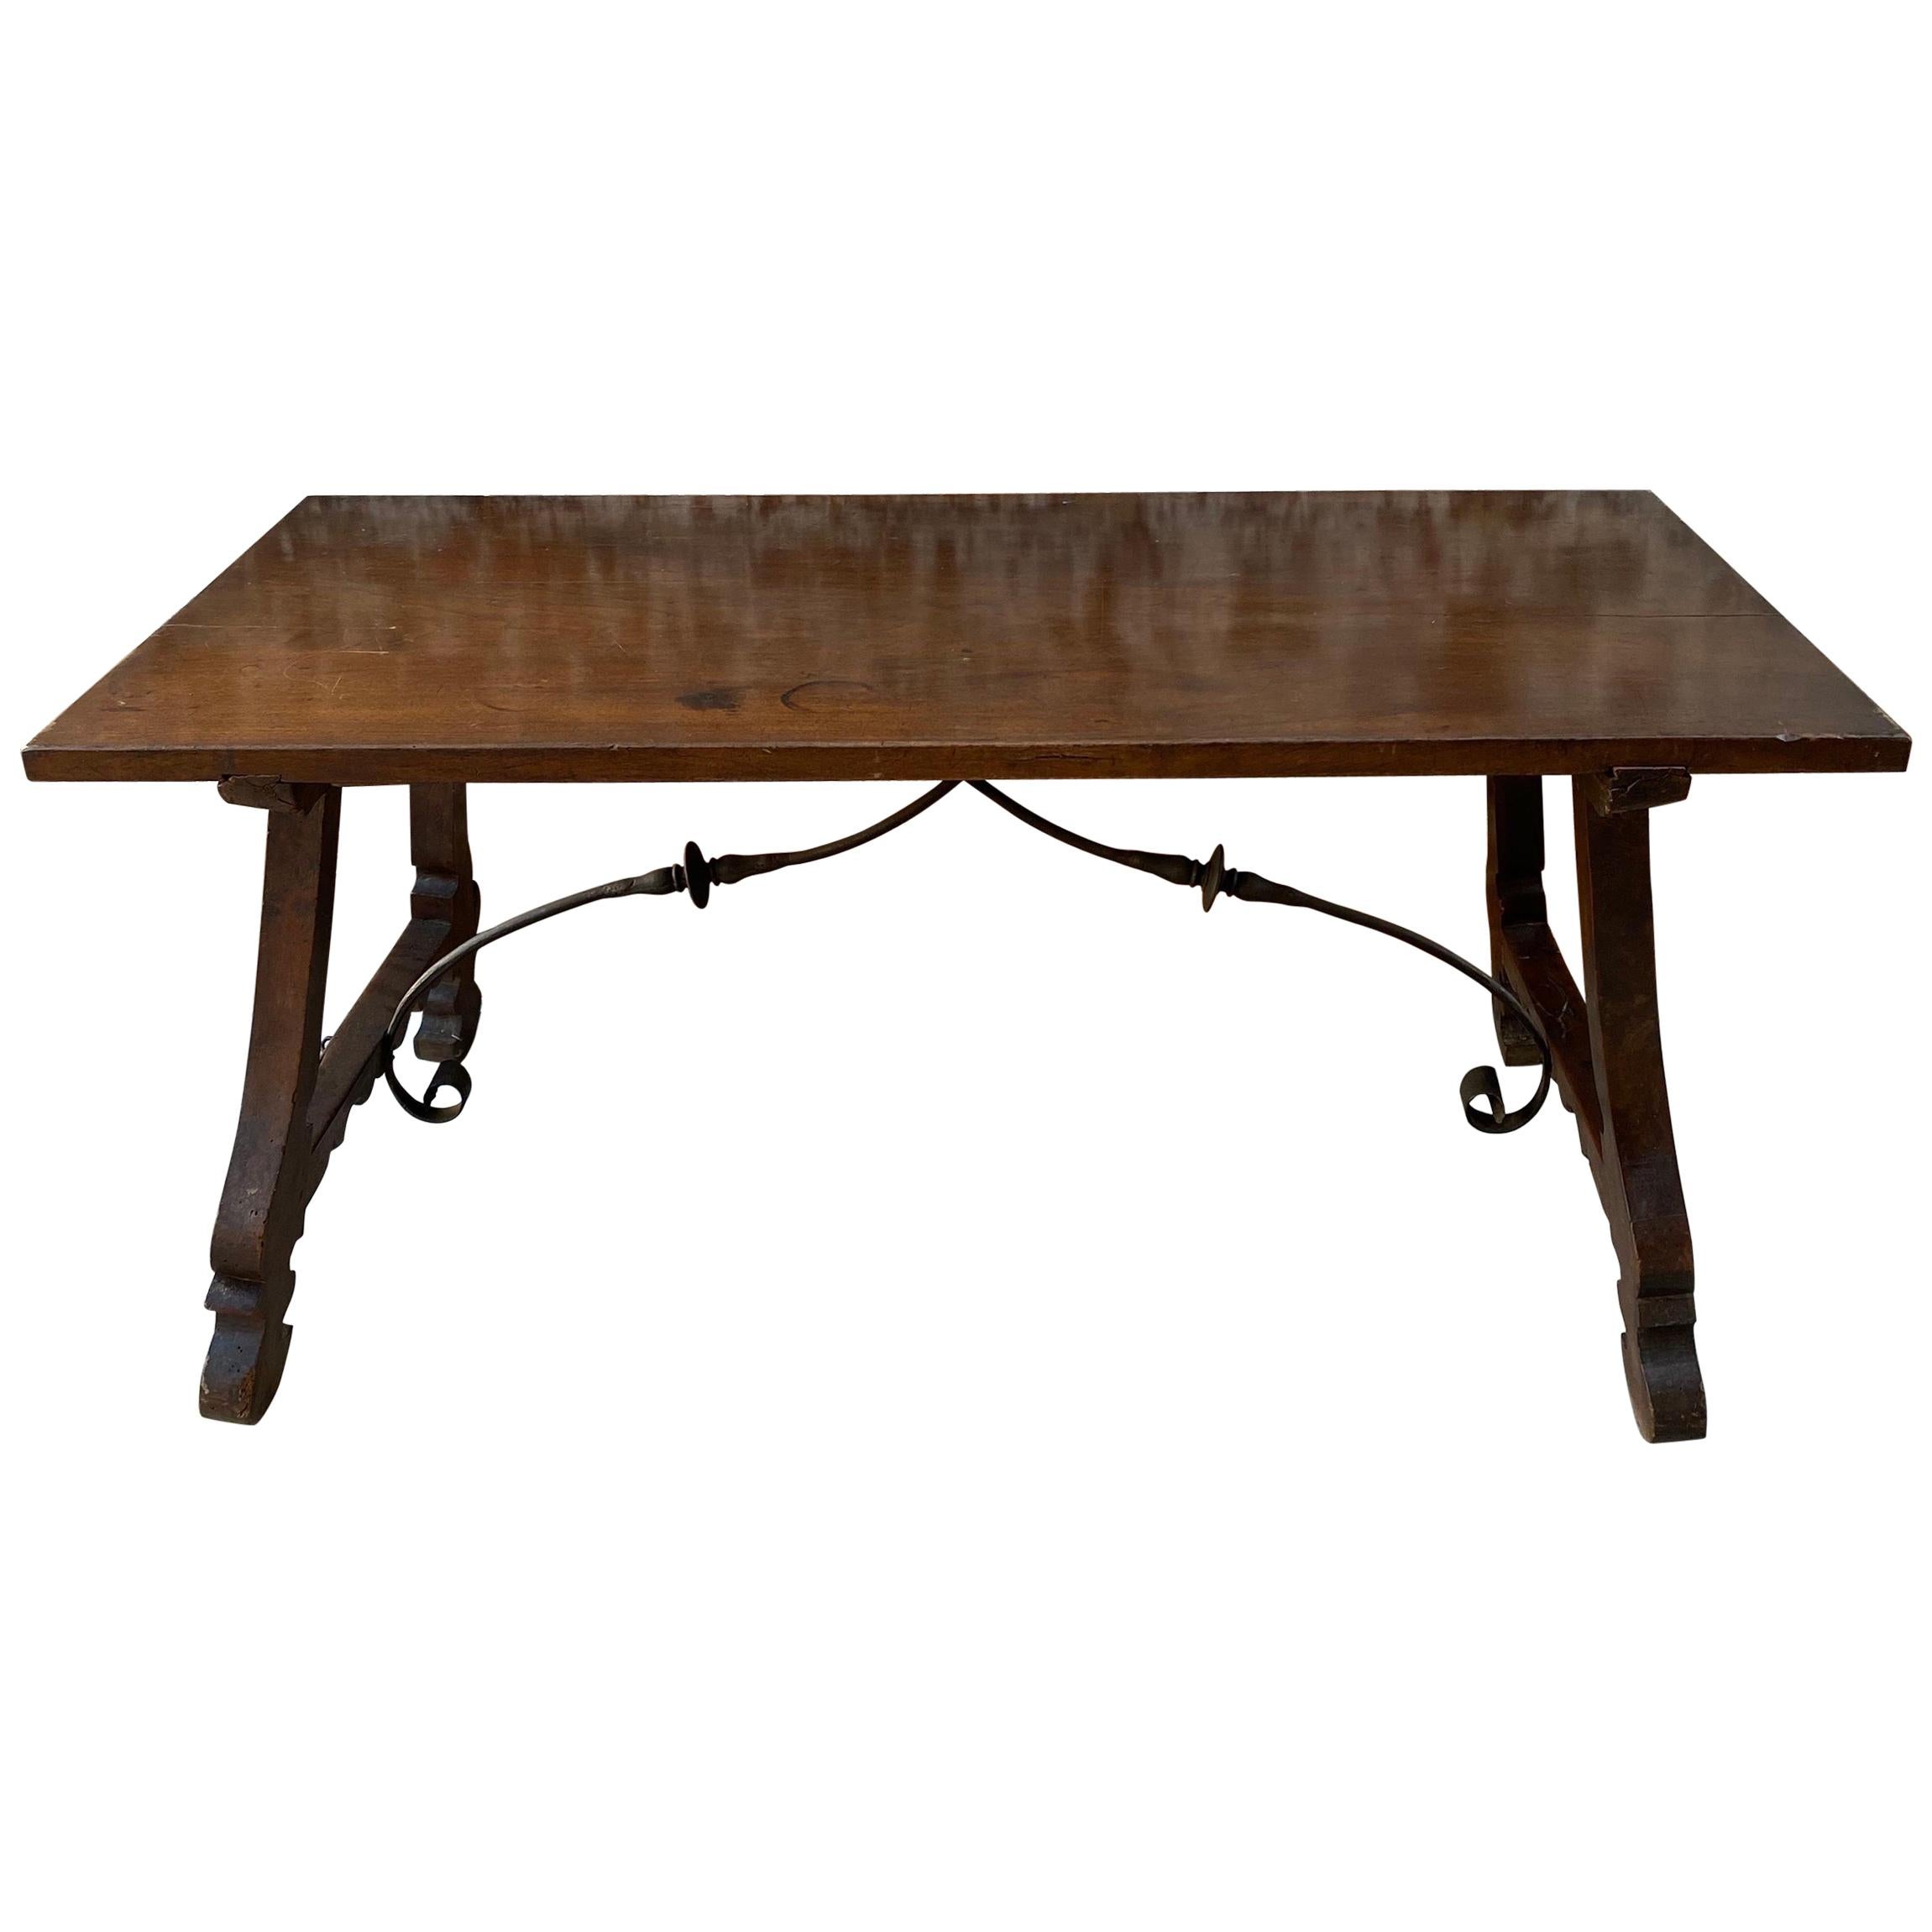 Spanish Farm Table with Trestle Base and Iron Support